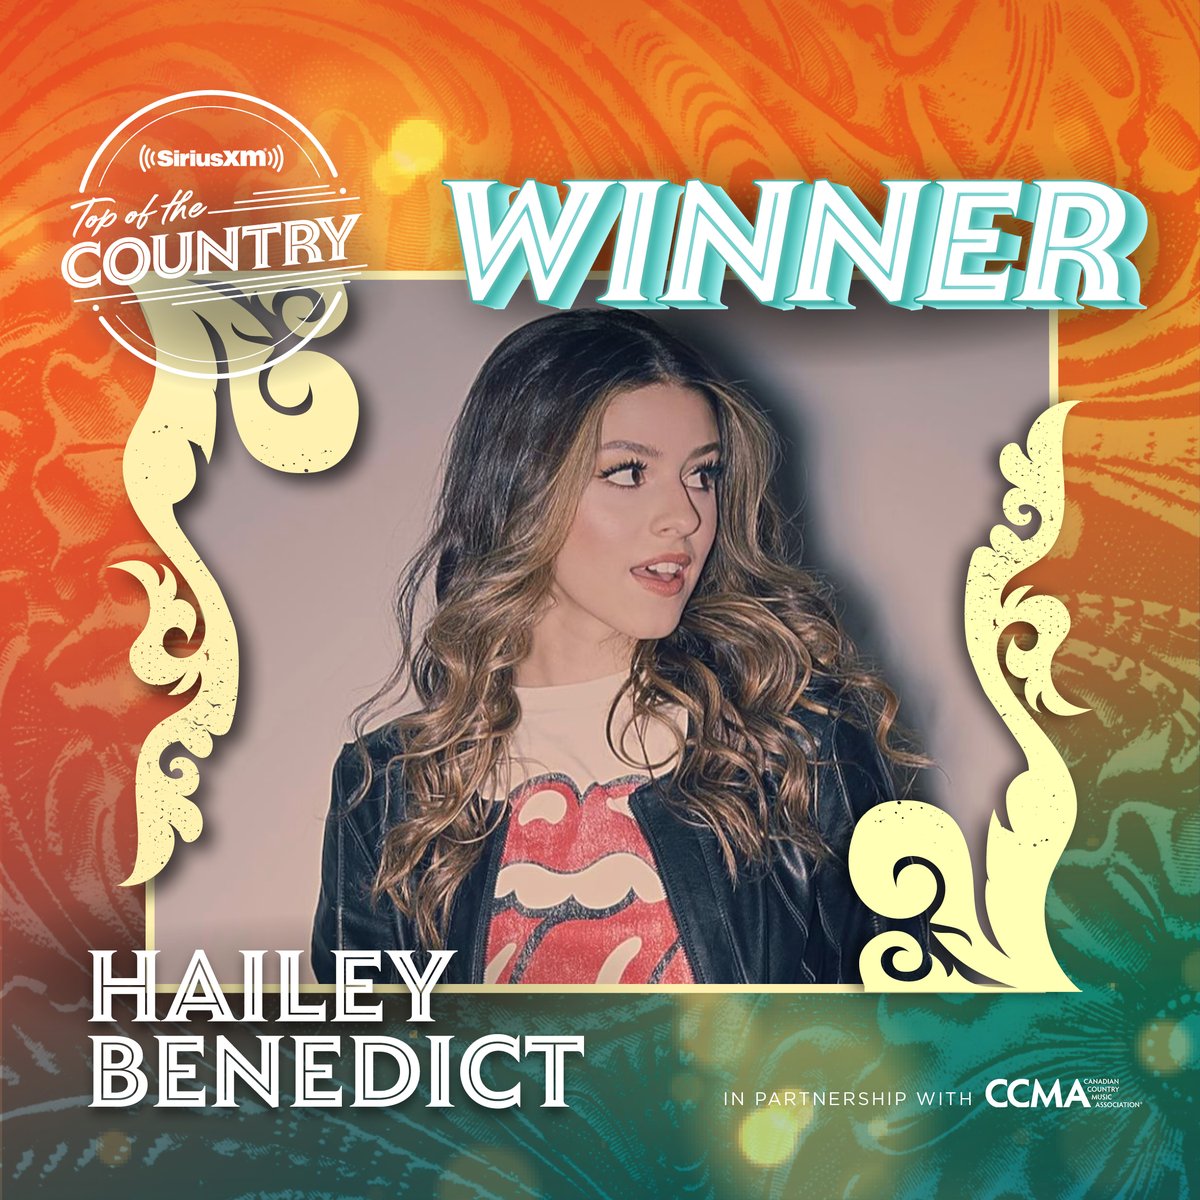 One week ago, we crowned the next big name in country music! Congratulations @thatsmehaileyb! The 2023 SiriusXM Canada #TopofTheCountry winner!

In partnership with @ccmaofficial

#SiriusXMCanada #CCMAawards